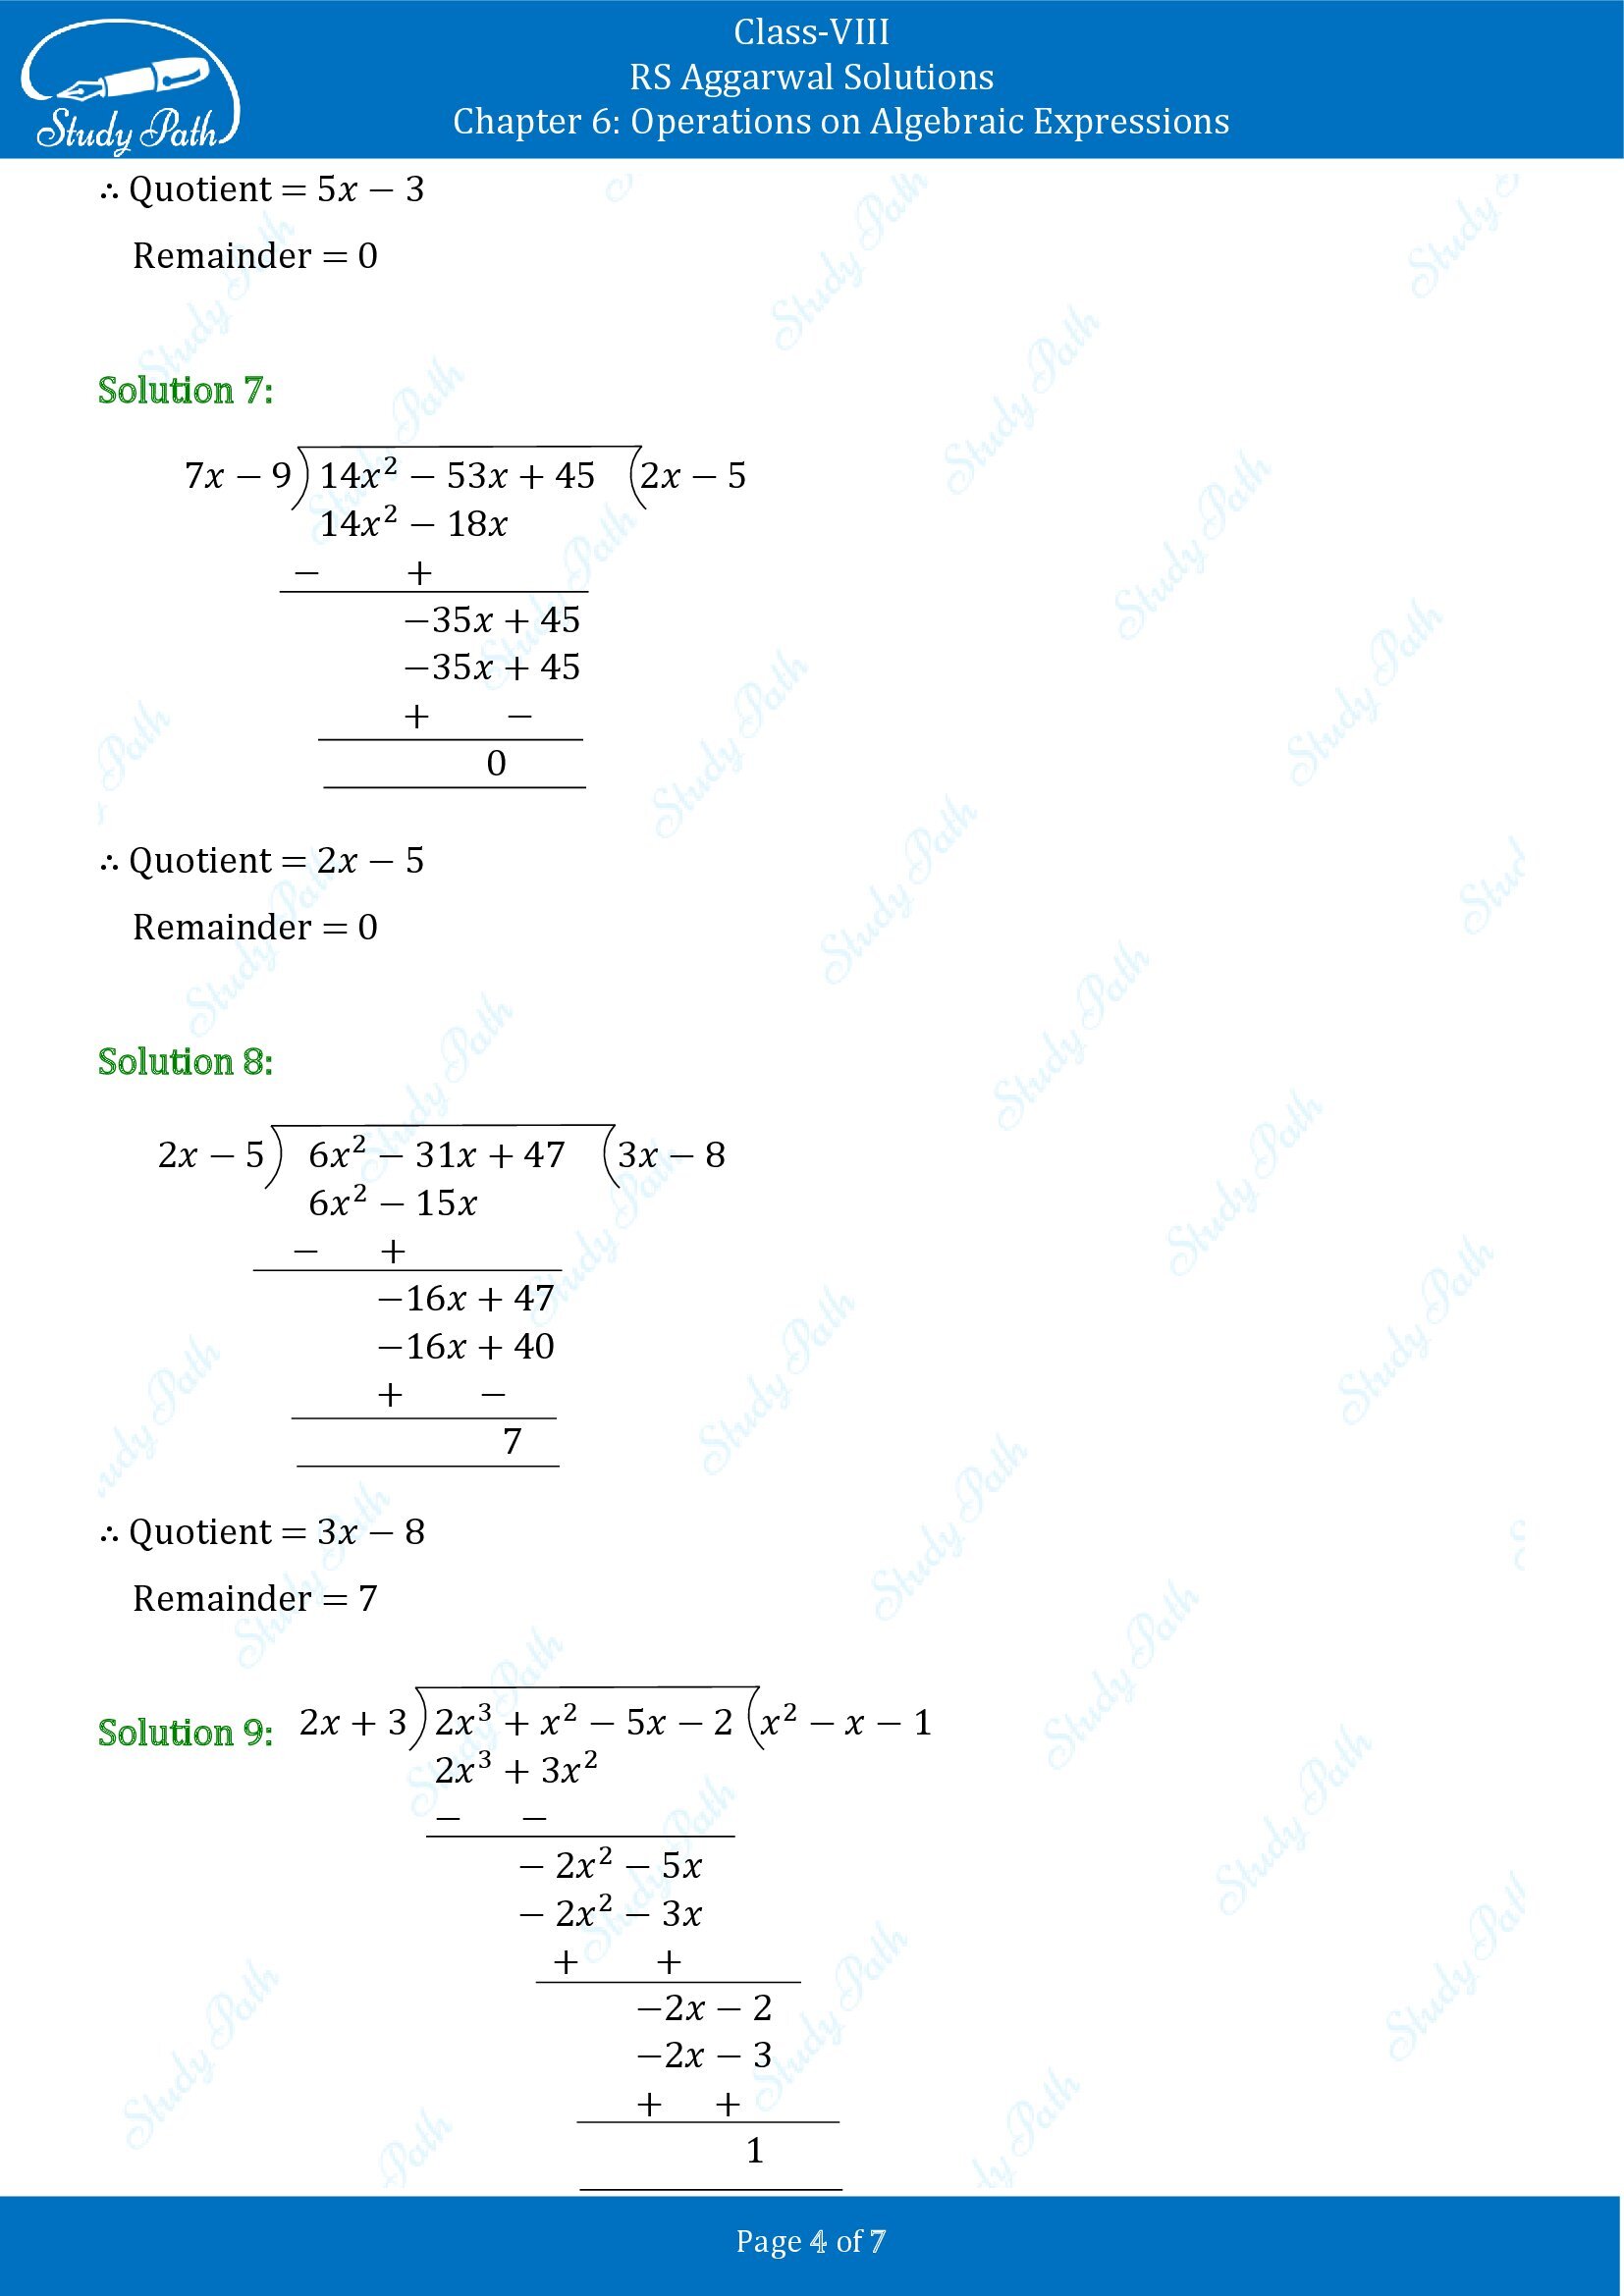 RS Aggarwal Solutions Class 8 Chapter 6 Operations on Algebraic Expressions Exercise 6C 00004